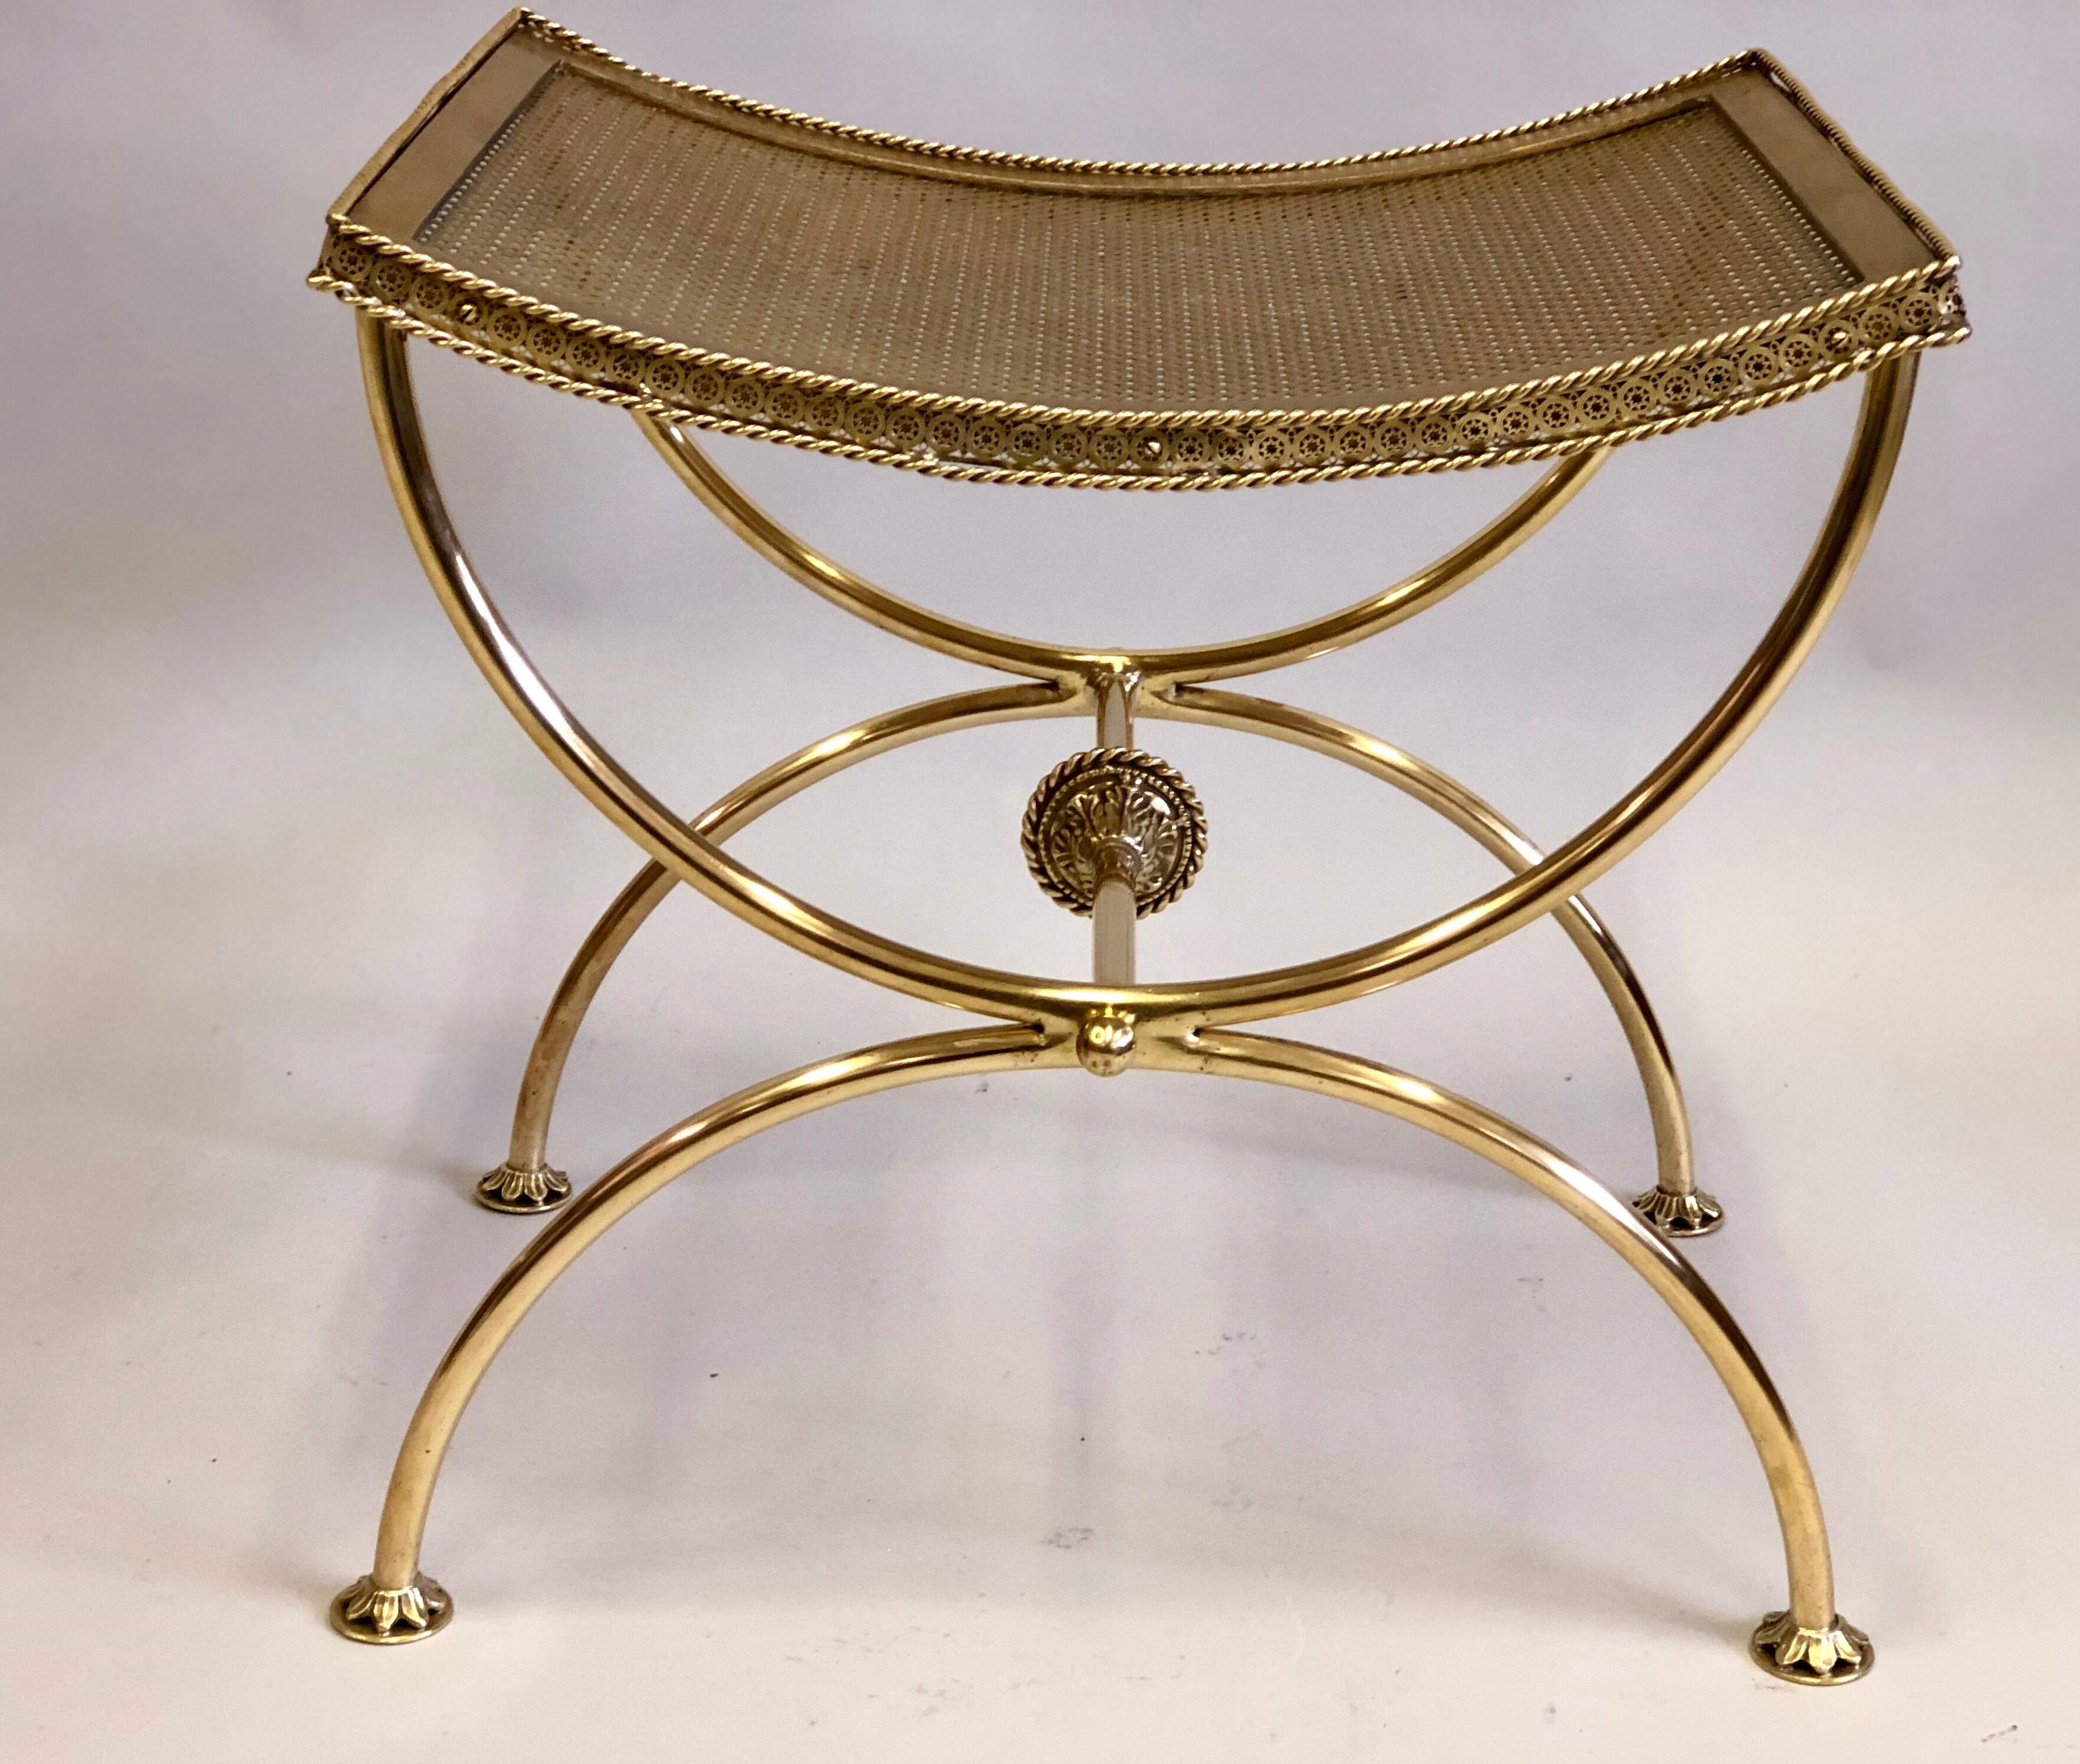 20th Century Pair of French Modern Neoclassical Gilt Bronze or Brass Benches by Maison Bagues